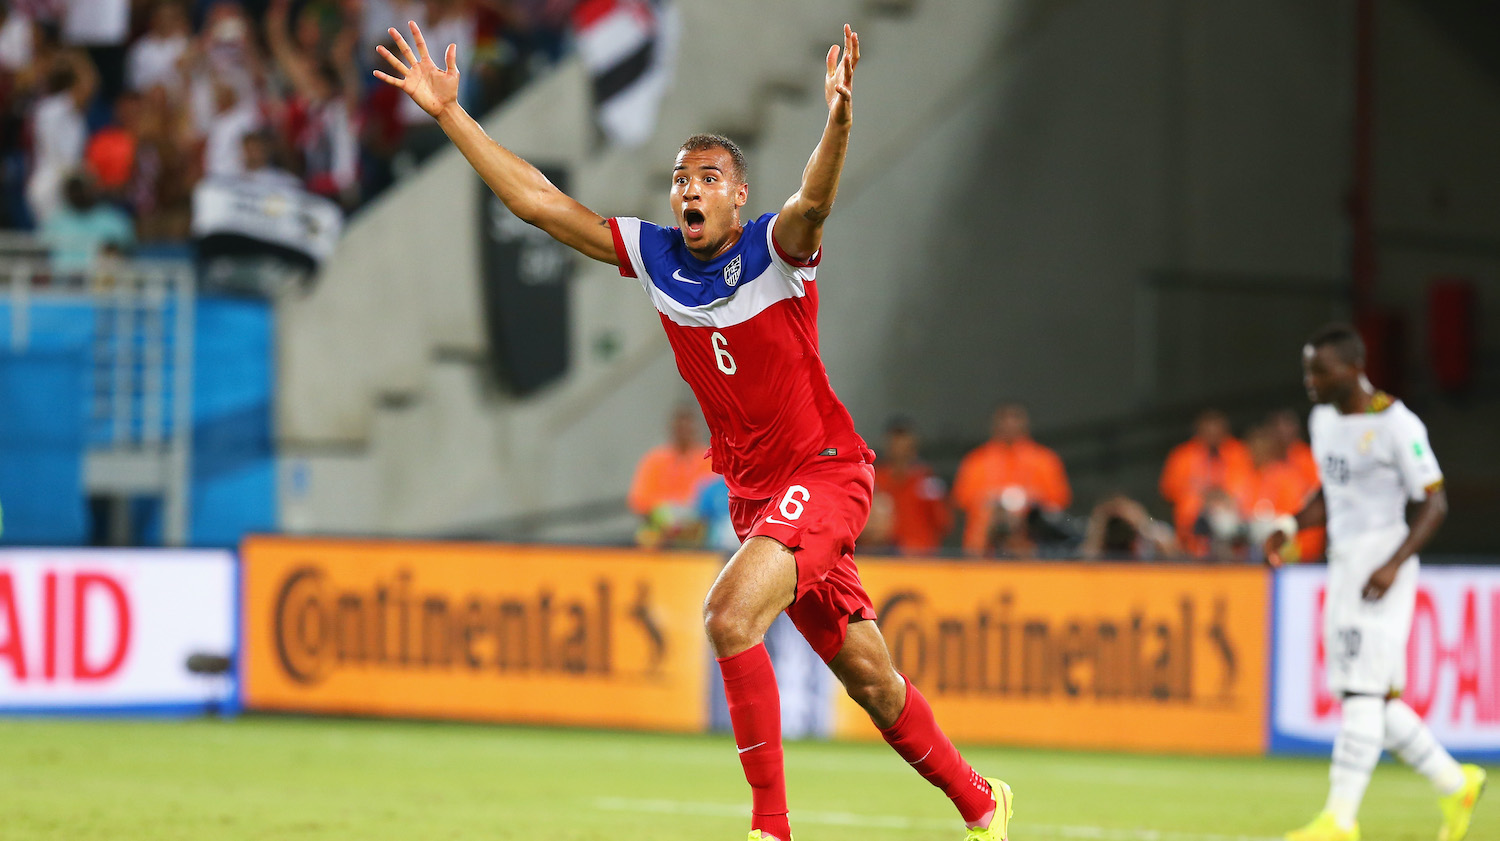 NATAL, BRAZIL - JUNE 16: John Brooks of the United States celebrates after scoring the team's second goal during the 2014 FIFA World Cup Brazil Group G match between Ghana and USA at Estadio das Dunas on June 16, 2014 in Natal, Brazil. (Photo by Alex Livesey - FIFA/FIFA via Getty Images)